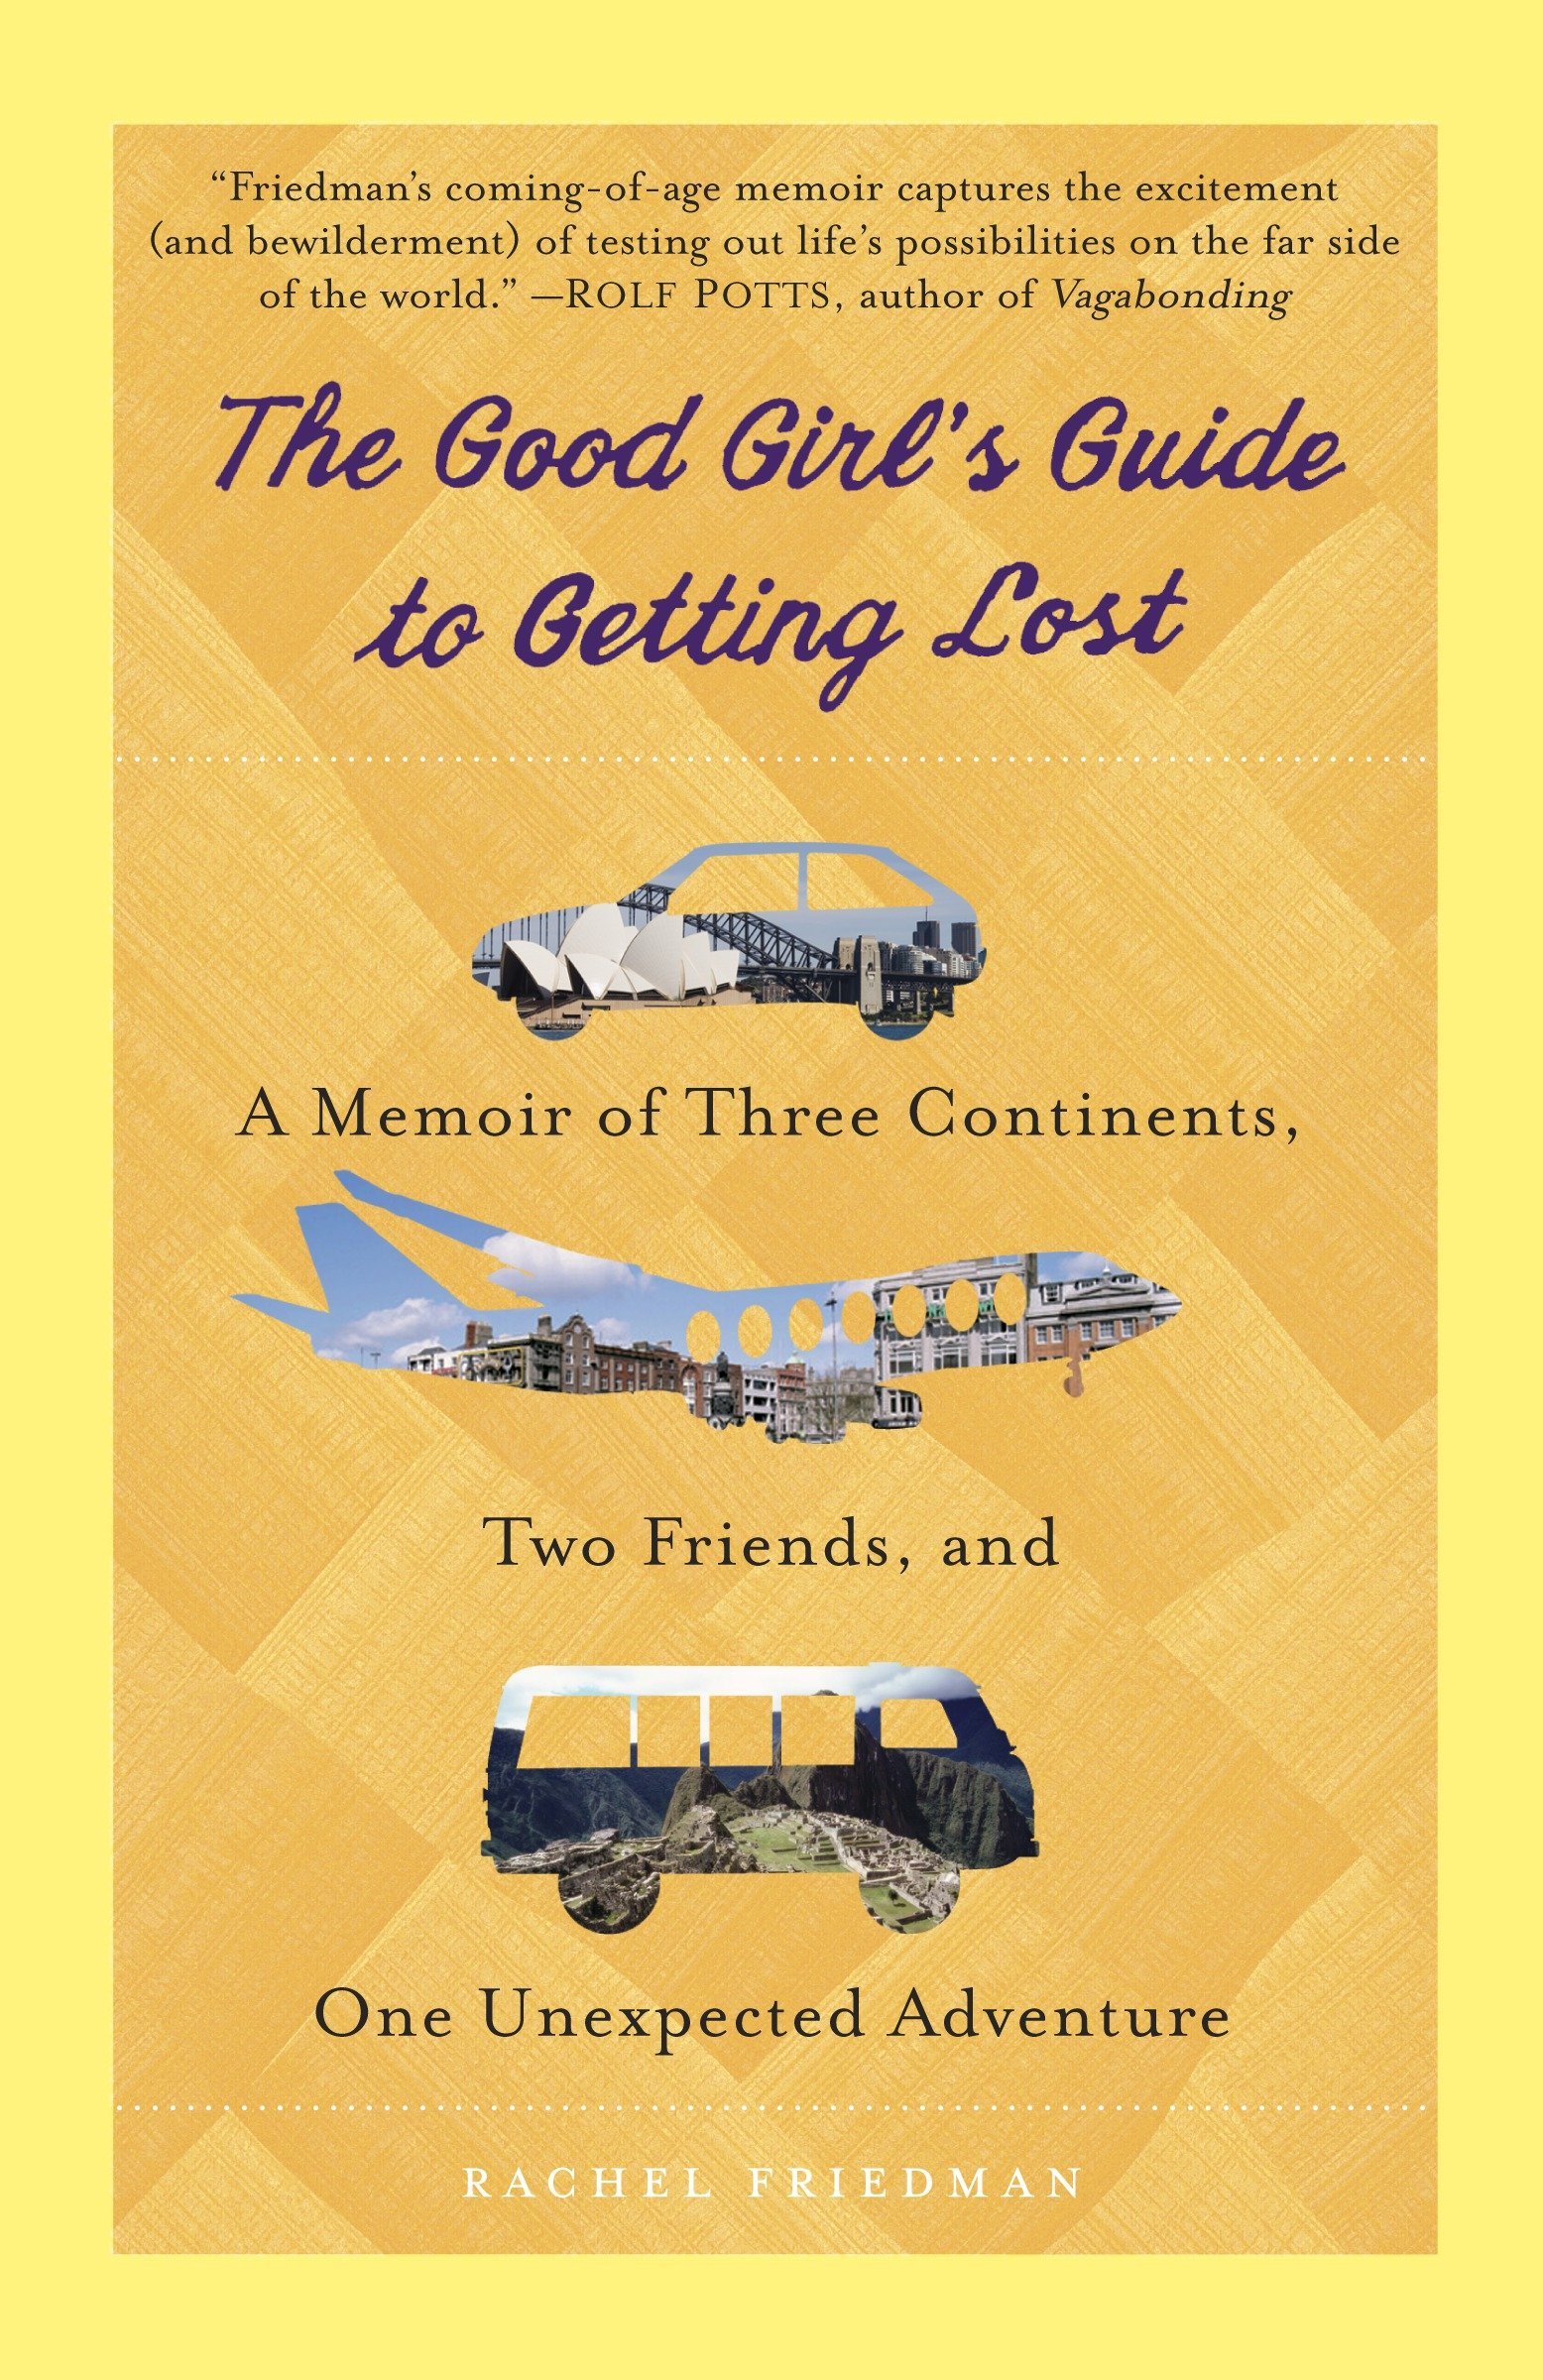 The Good Girl's Guide to Getting Lost by Rachel Friedman best travel book women